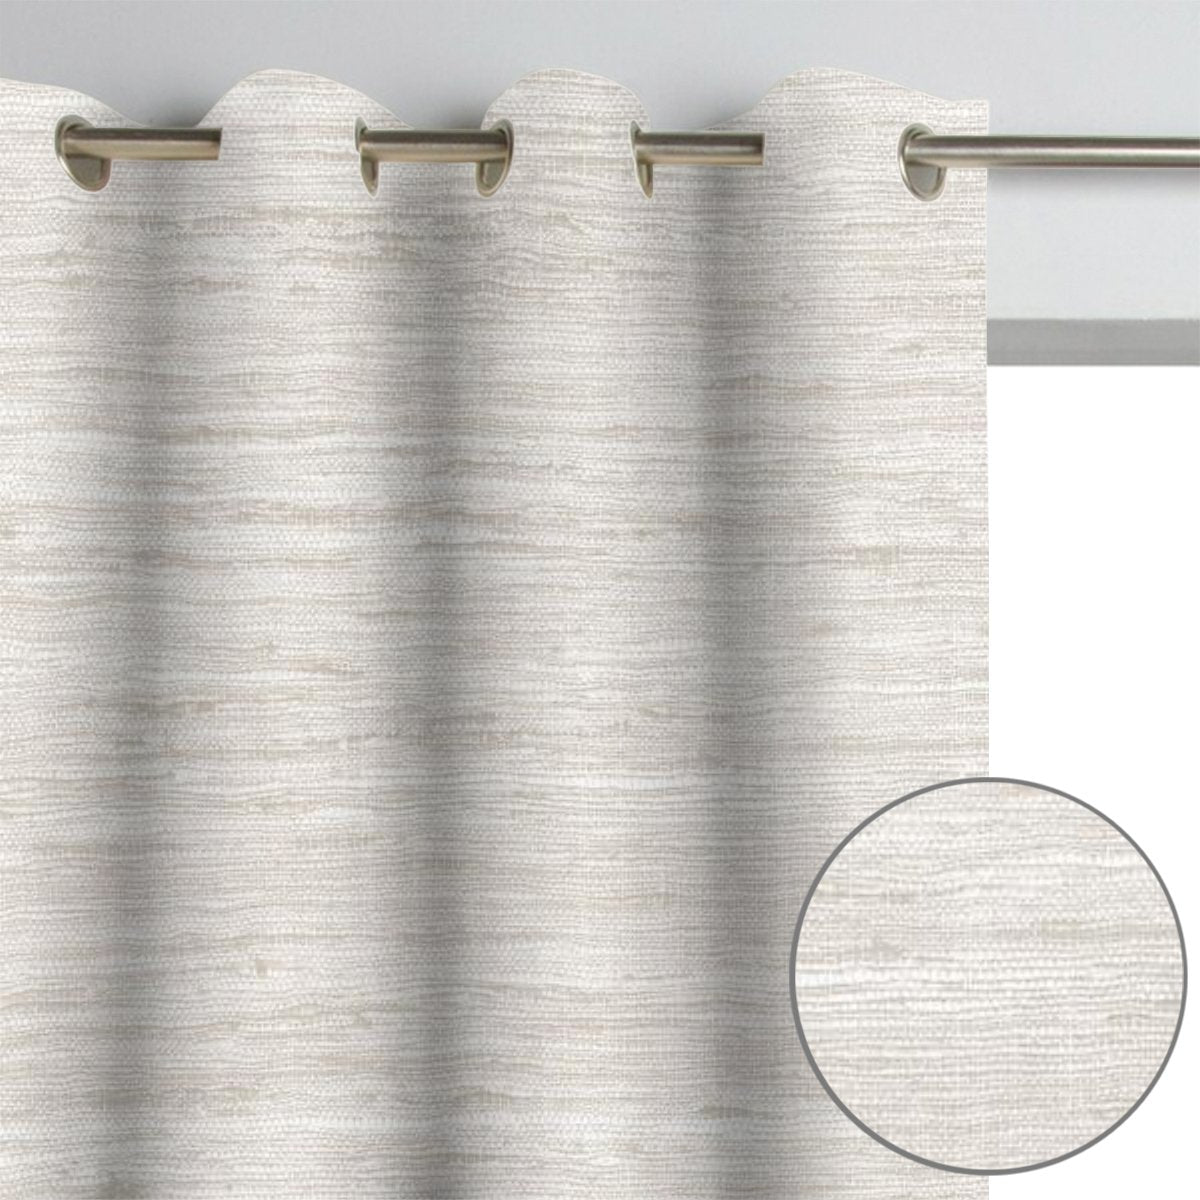 2 Pack, Newest Natural Light Filtering Curtains (Blackout available)